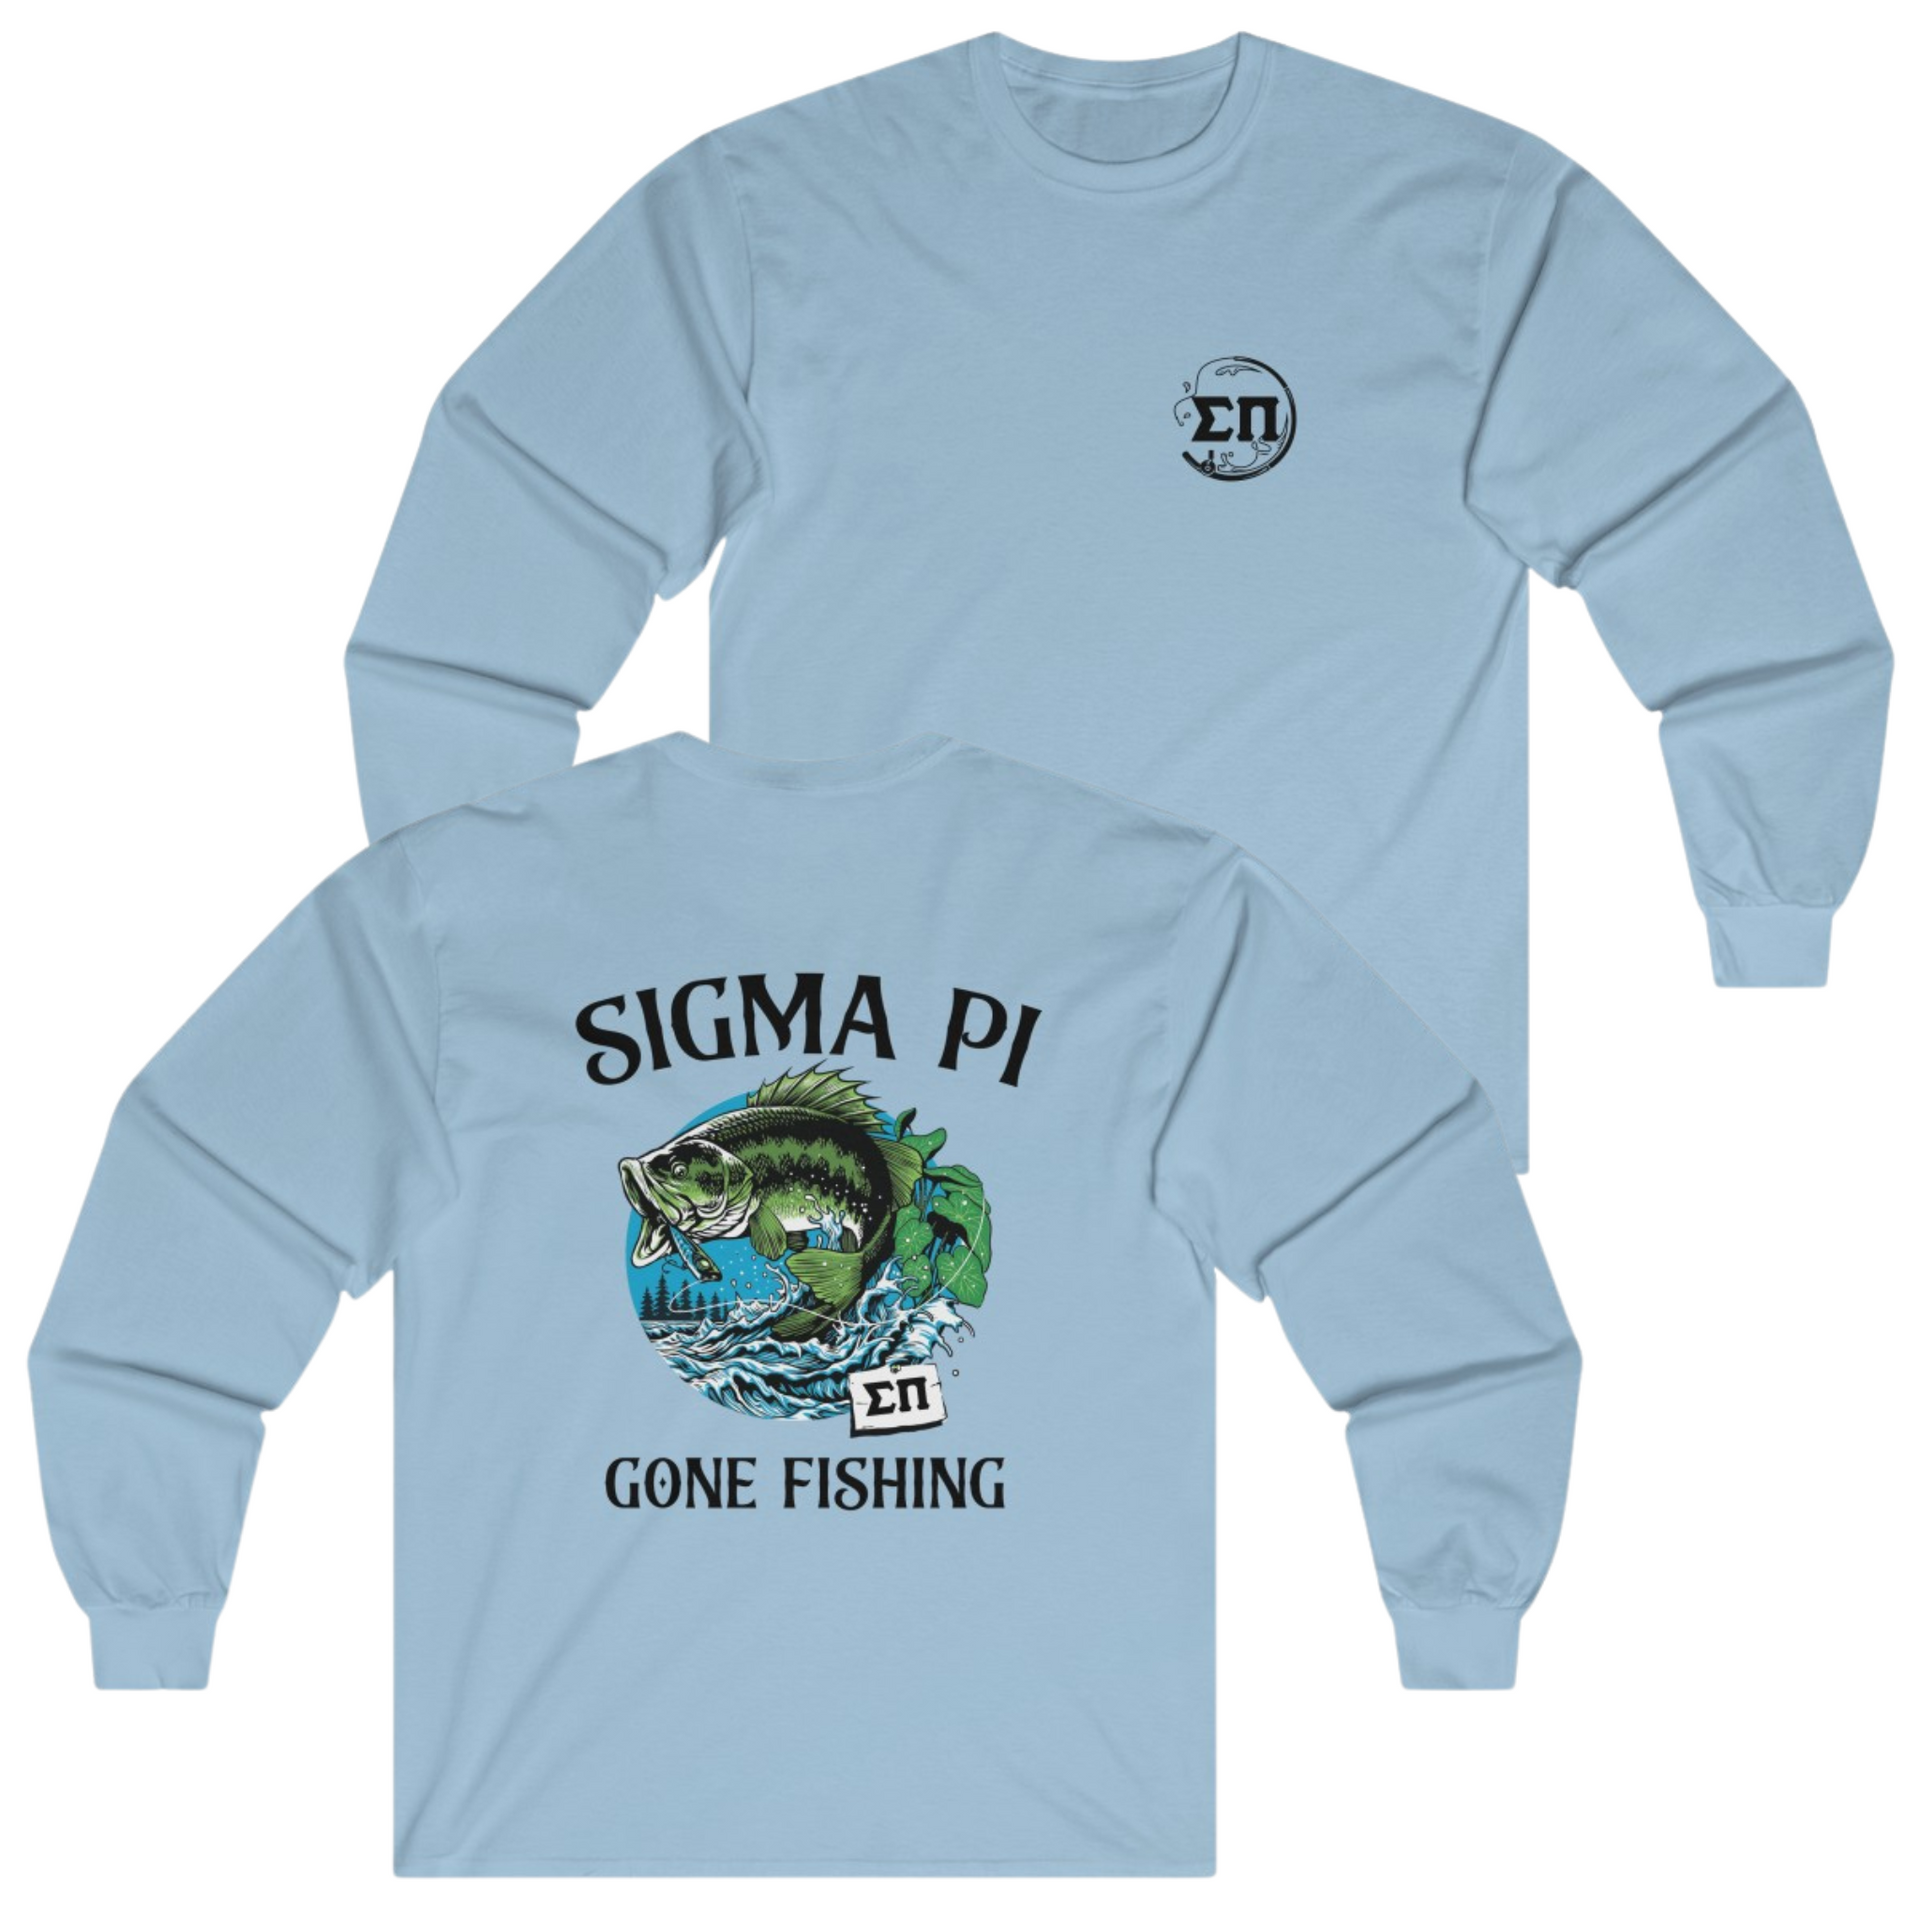 Light Blue Sigma Pi Graphic Long Sleeve T-Shirt | Gone Fishing | Sigma Pi Apparel and Merchandise 